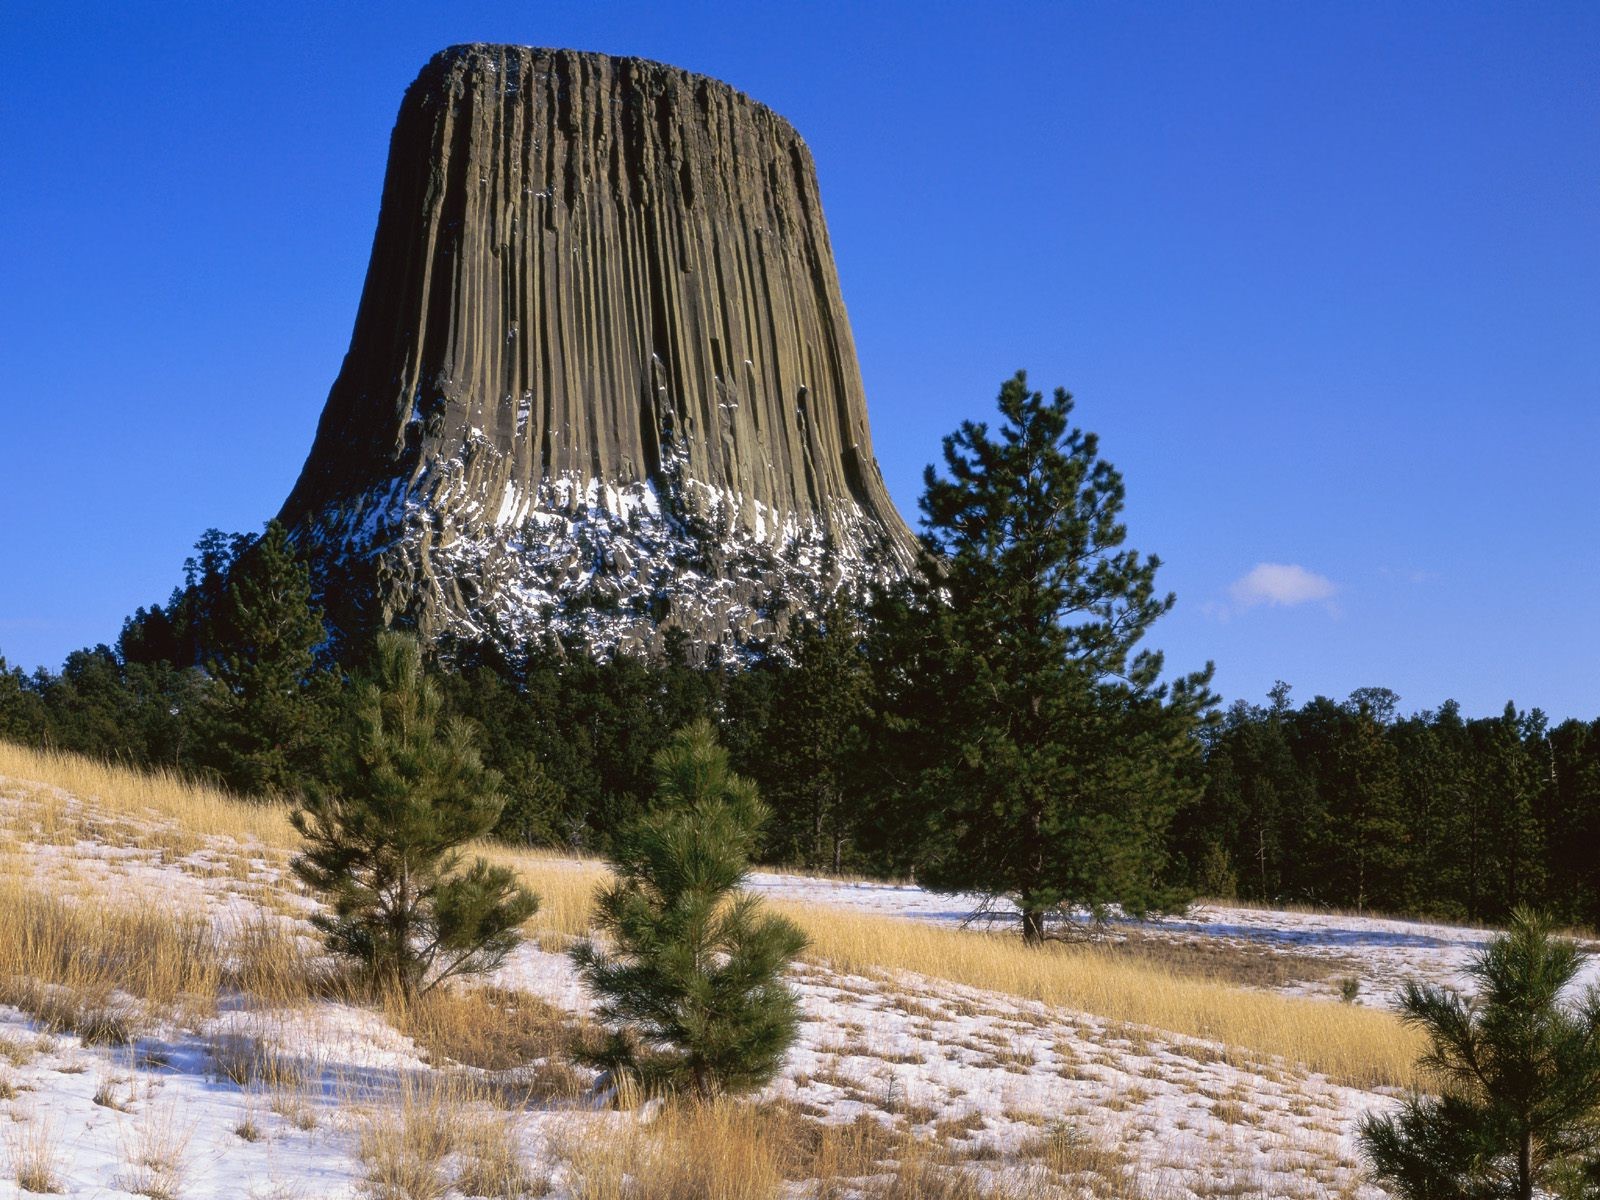 You Can Devils Tower Wallpaper By Clicking The Device Below